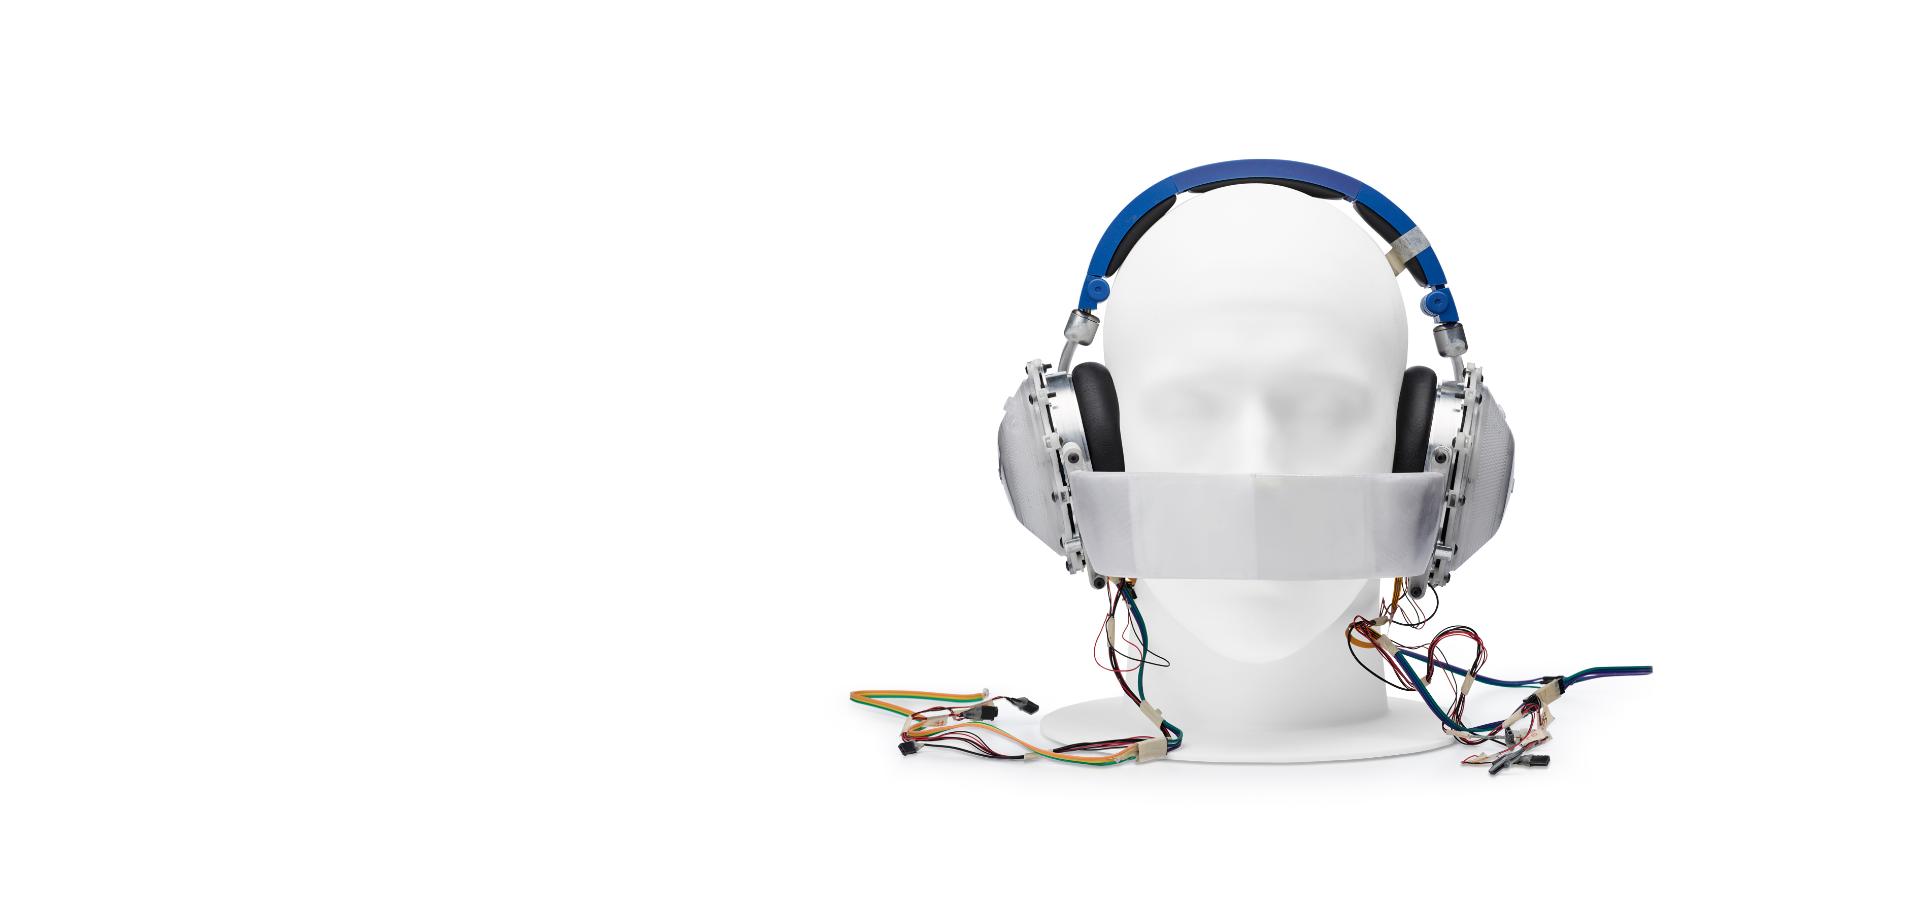 Manikin head wearing prototype headphones, with band across nose and mouth, and wires coming from the earcups